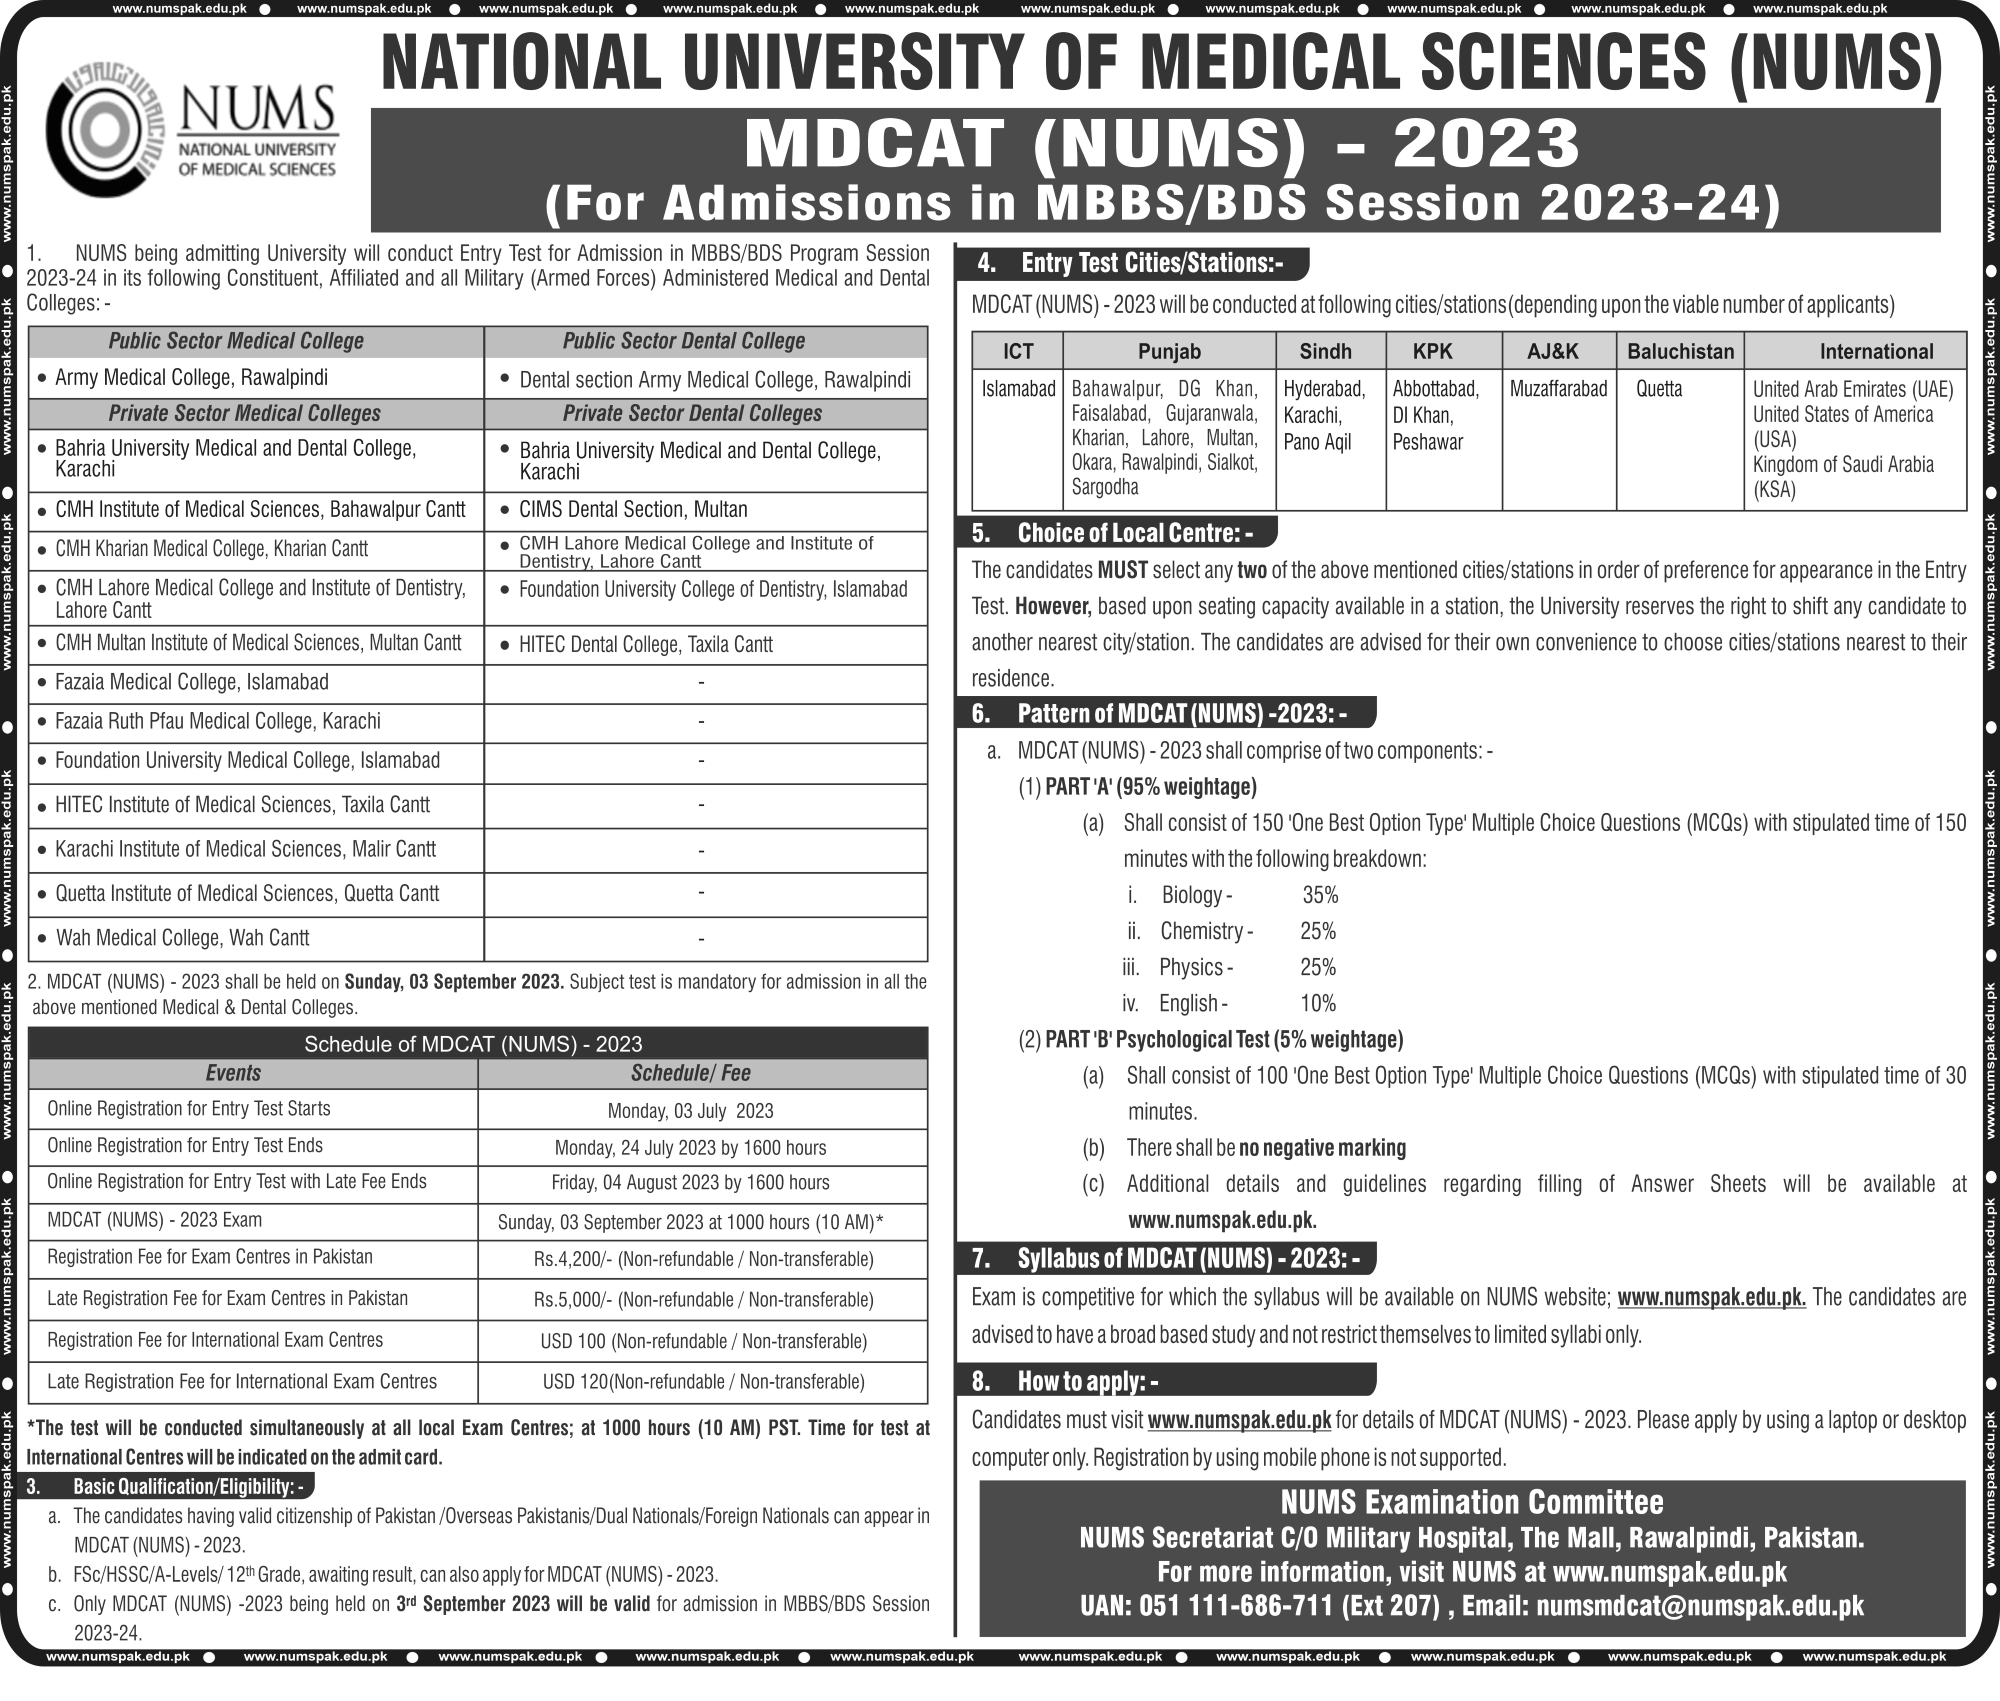 NUMS MDCAT Entry Test Registration 2023/24 Last Date Fee Structure